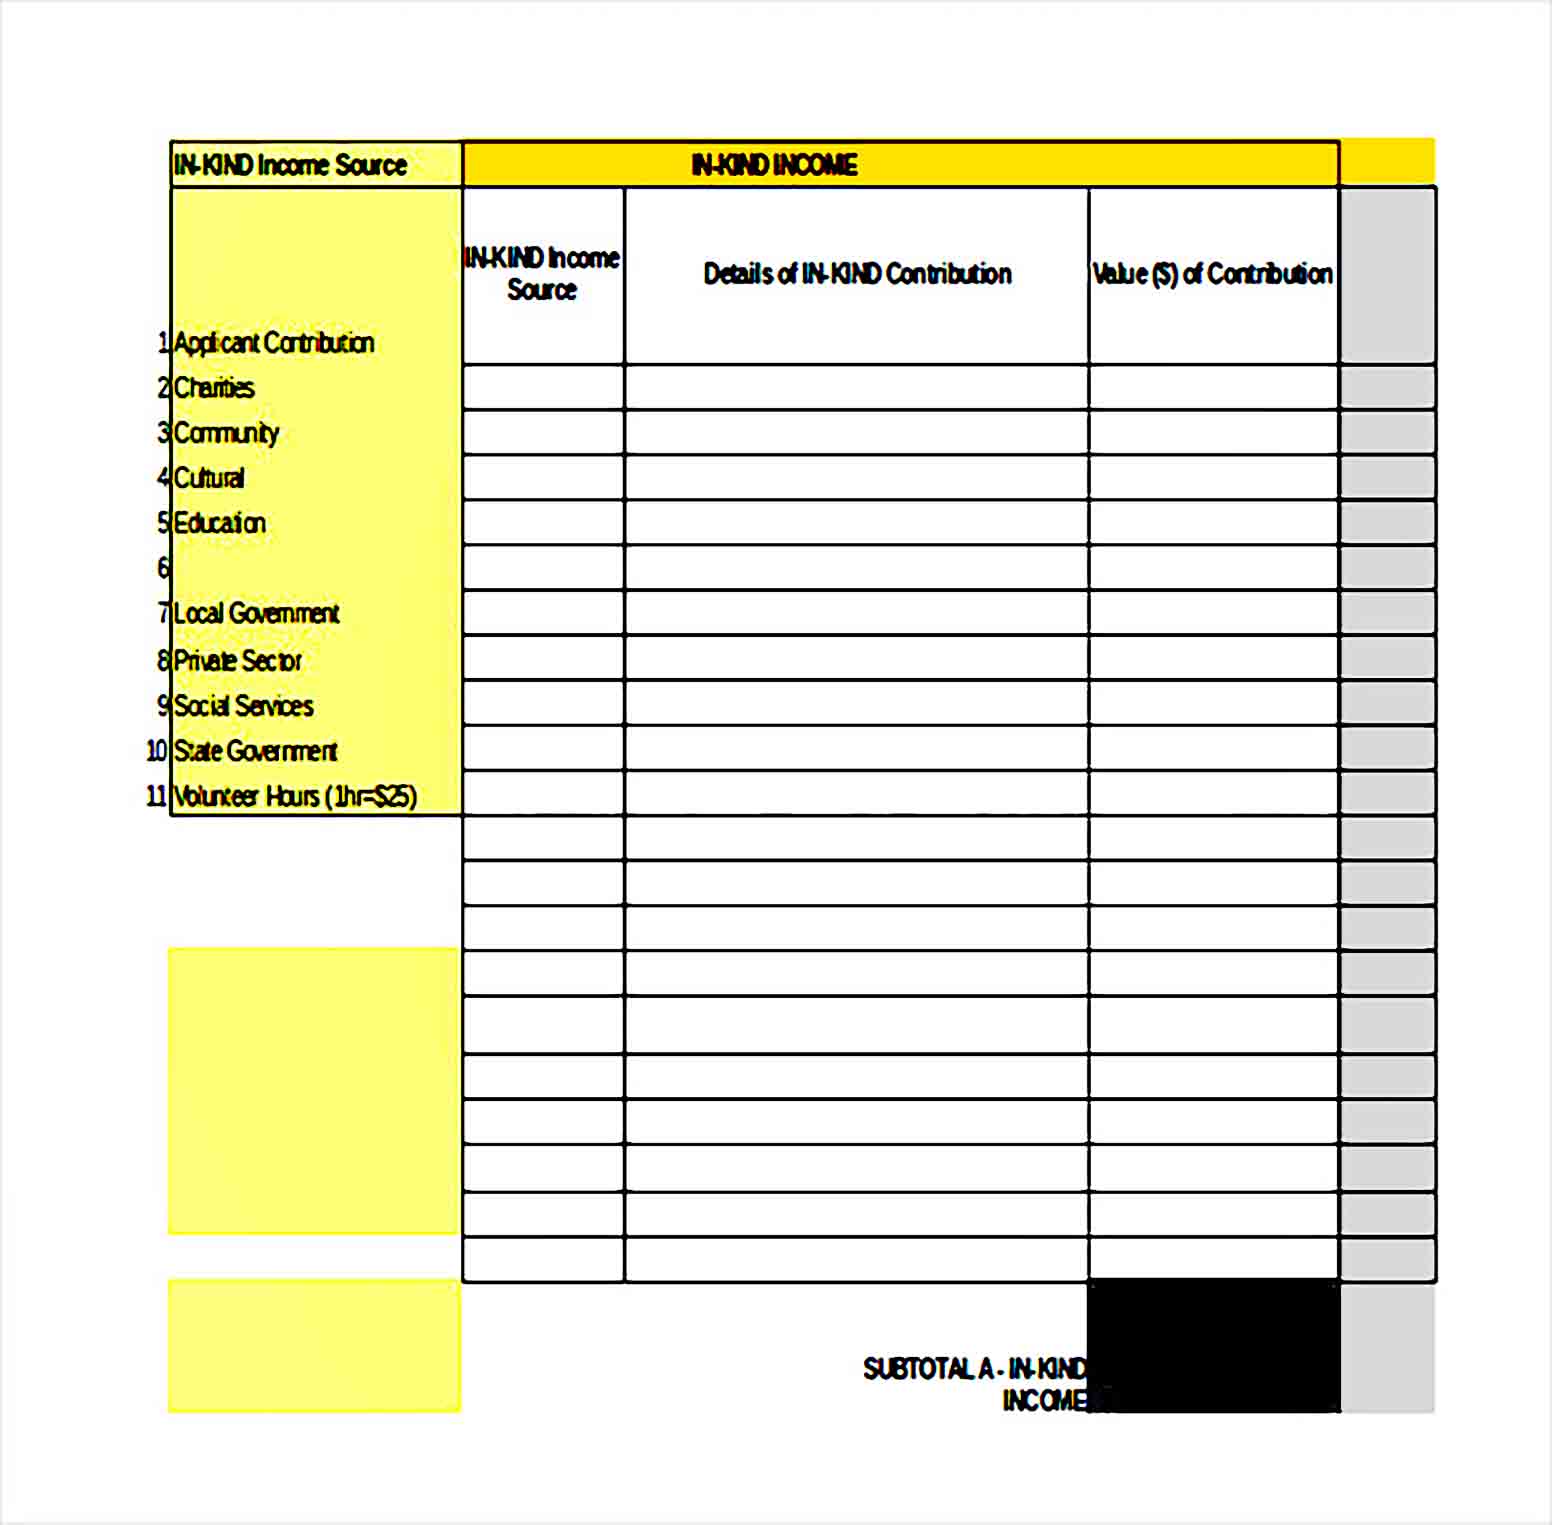 Sample Excel Budget Template